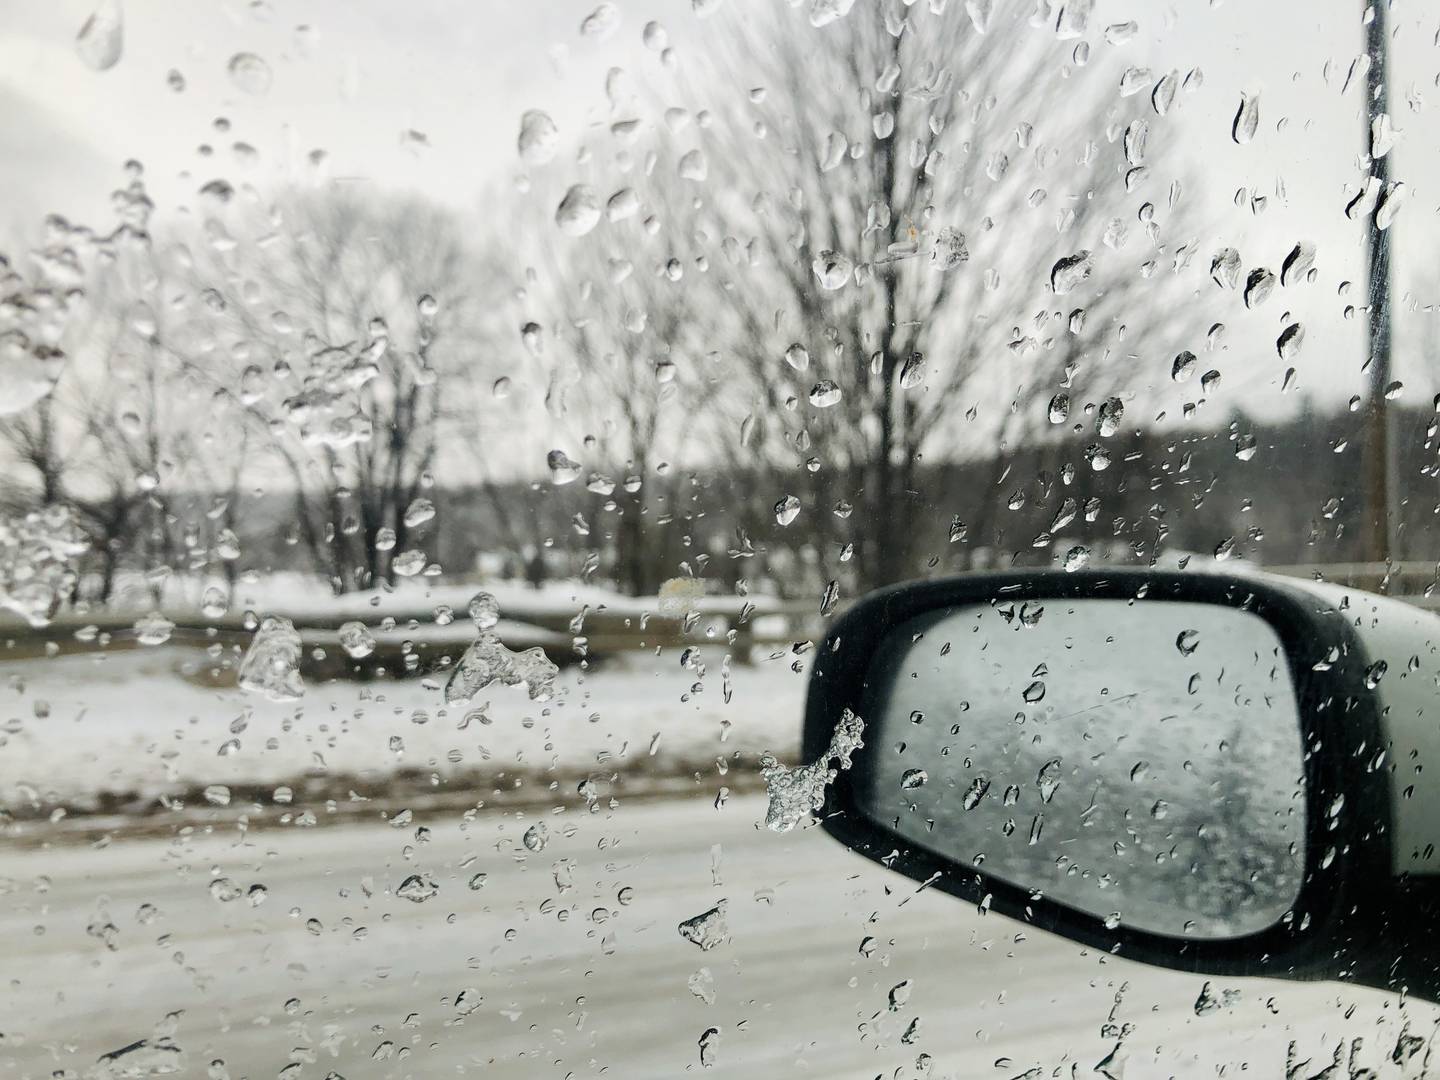 A picture of a vehicle window from the perspective of someone inside the vehicle, looking out. The window is covered in rain and melting frost, with a rearview mirror in the photo and an icy landscape beyond.